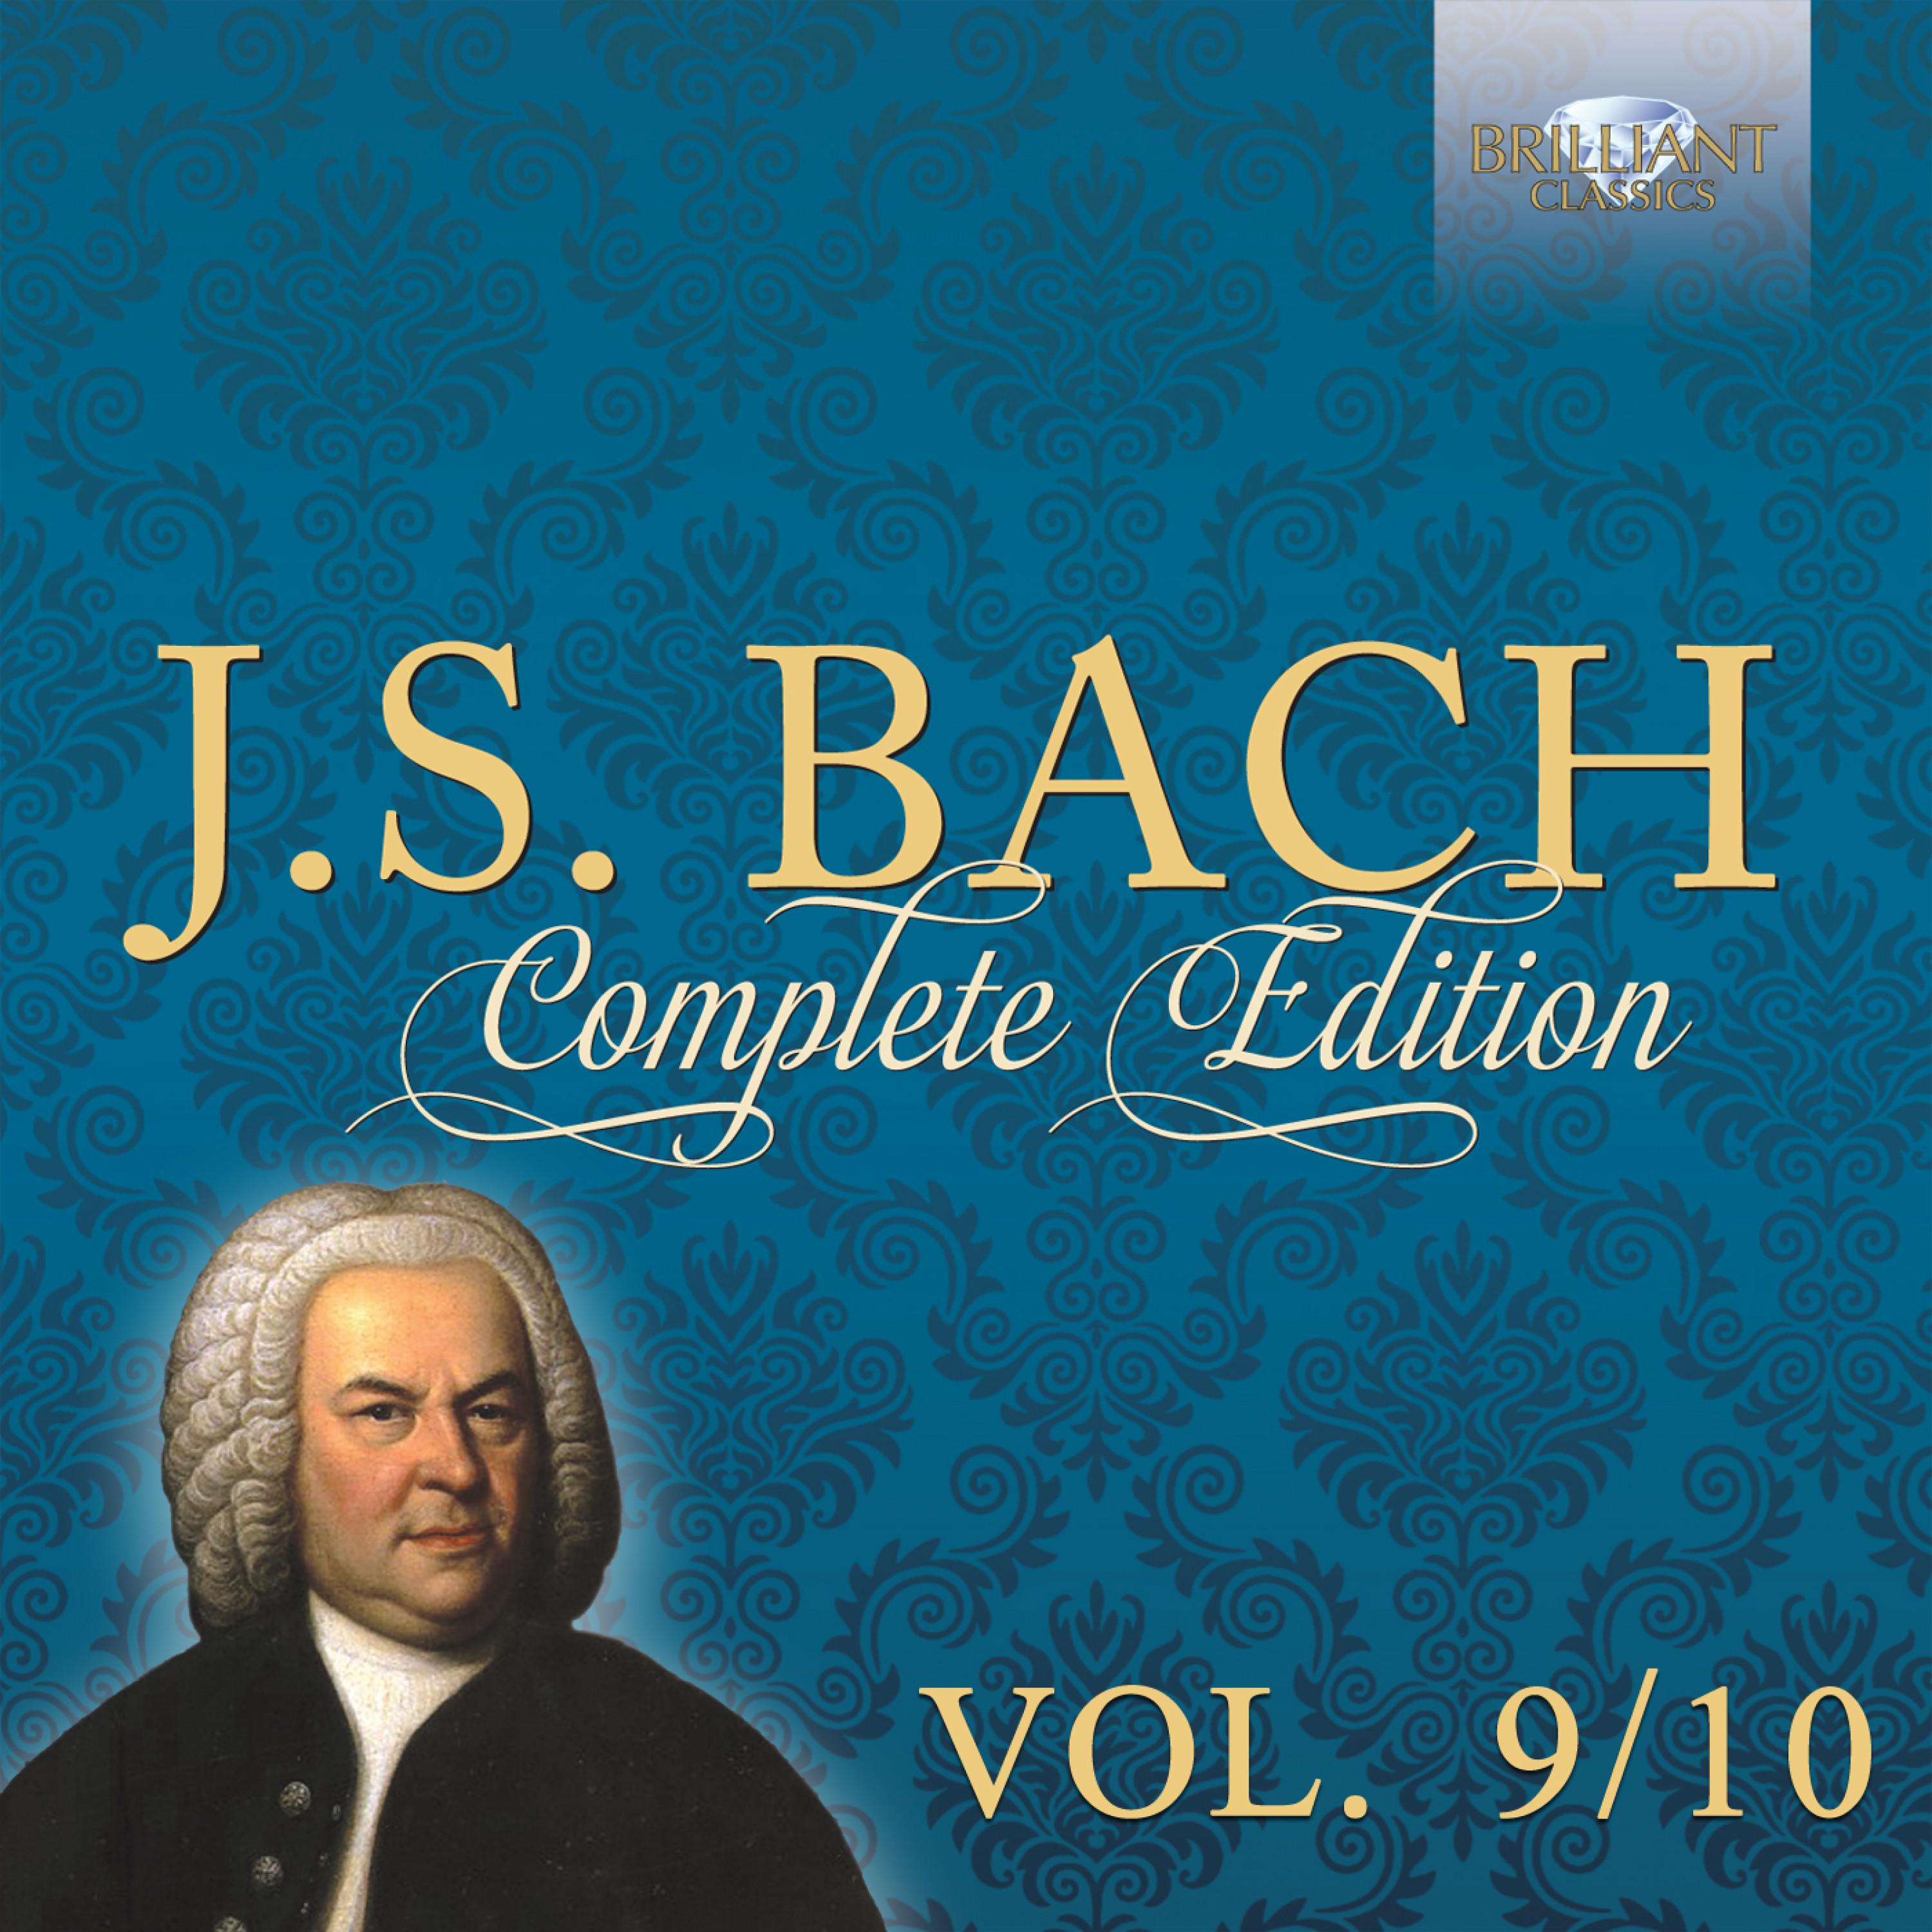 J.S. Bach: Complete Edition, Vol. 9/10